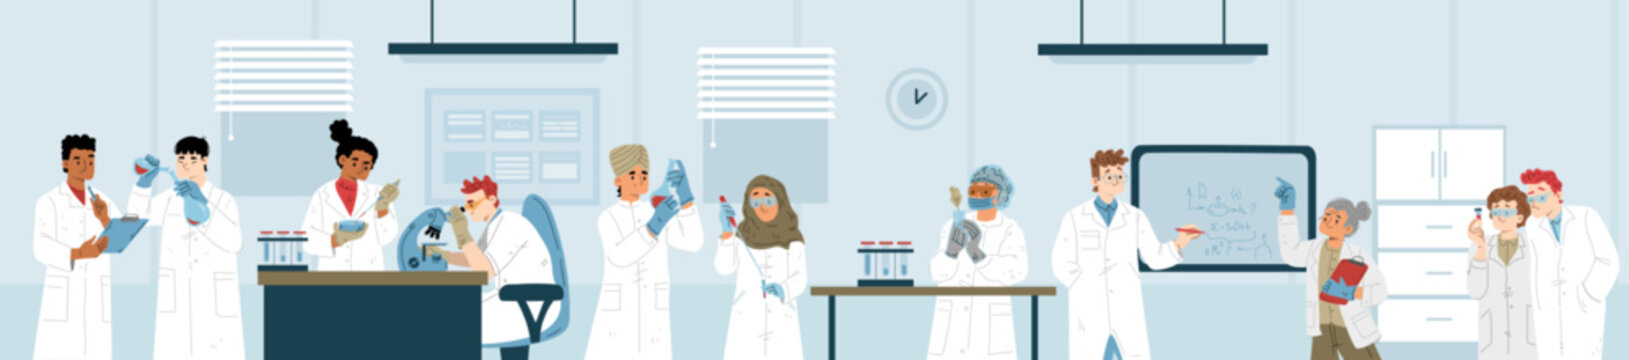 Science laboratory research and development. Medicine, genetics, chemistry or biochemistry scientists working together in lab with microscope and equipment, Cartoon linear flat vector illustration